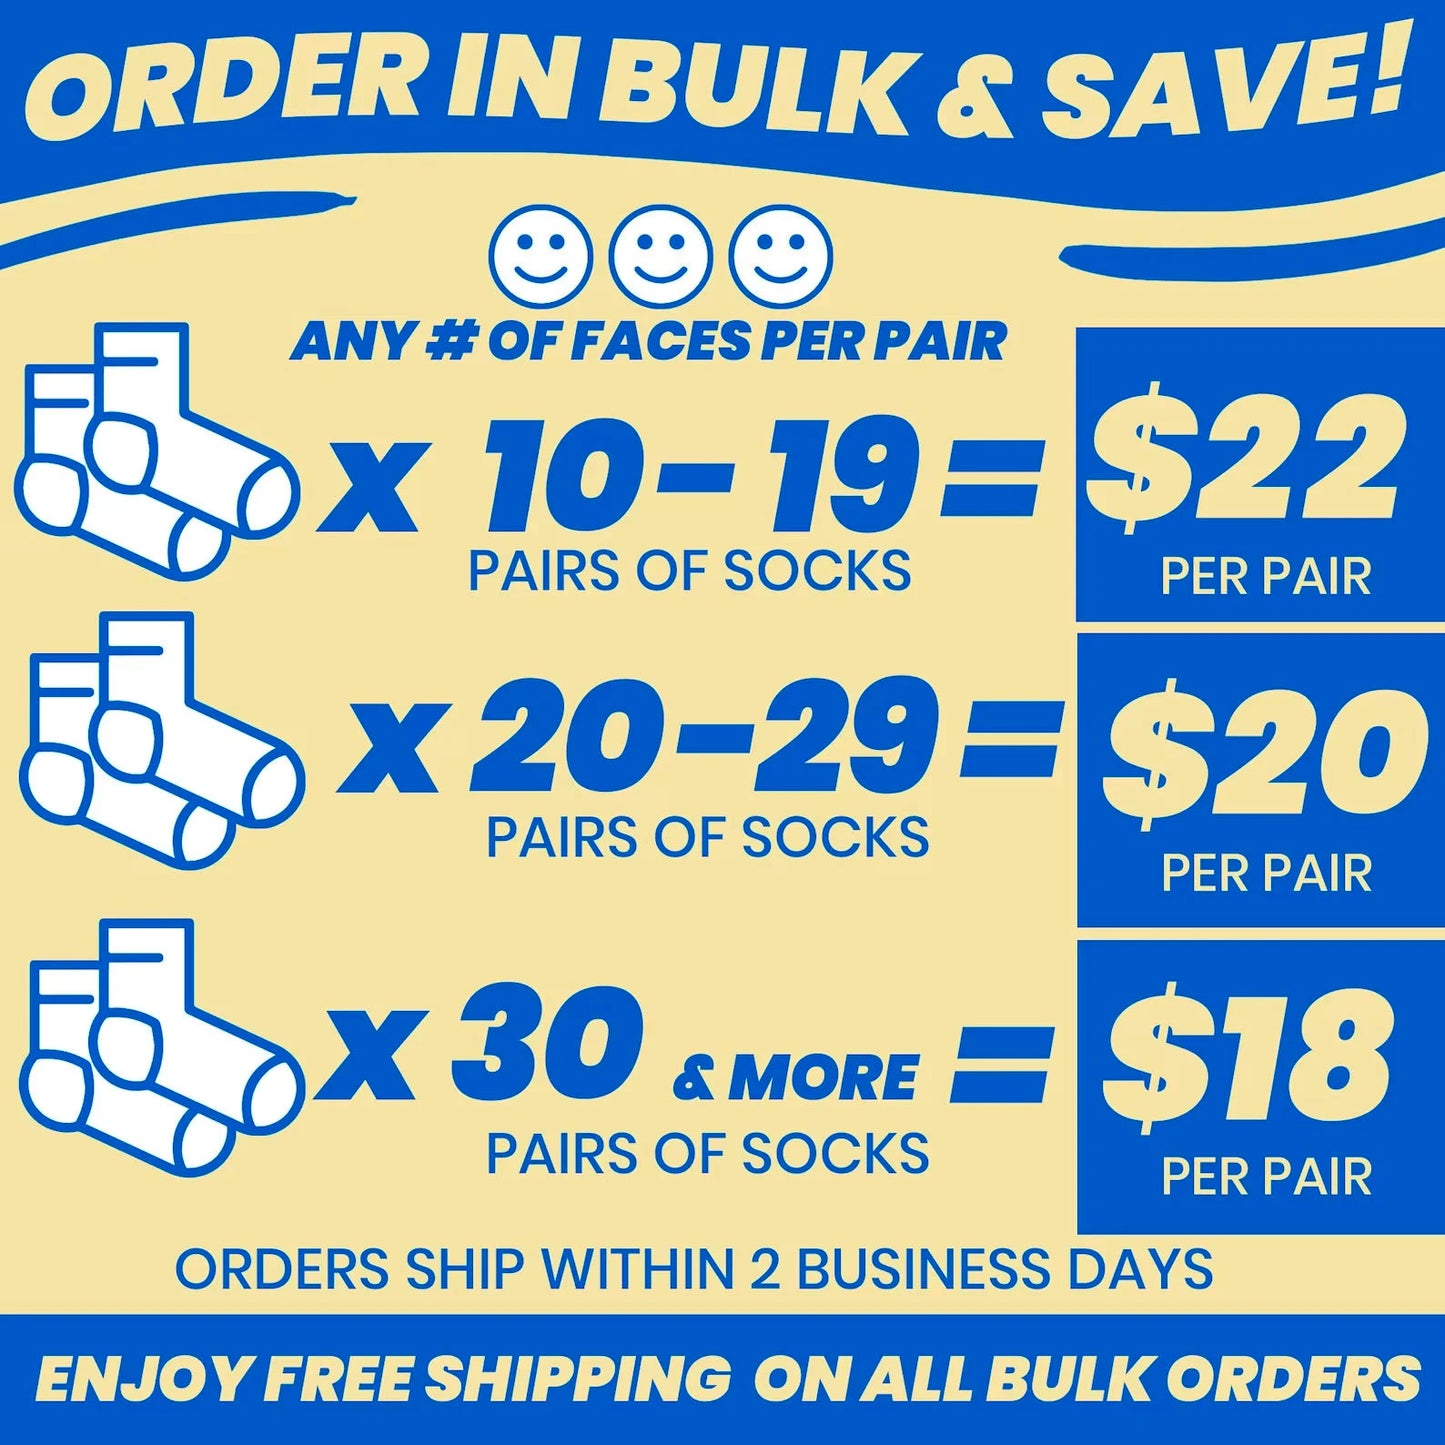 work from home employee of the month coworker gift socks with faces bulk ordering option with discounts